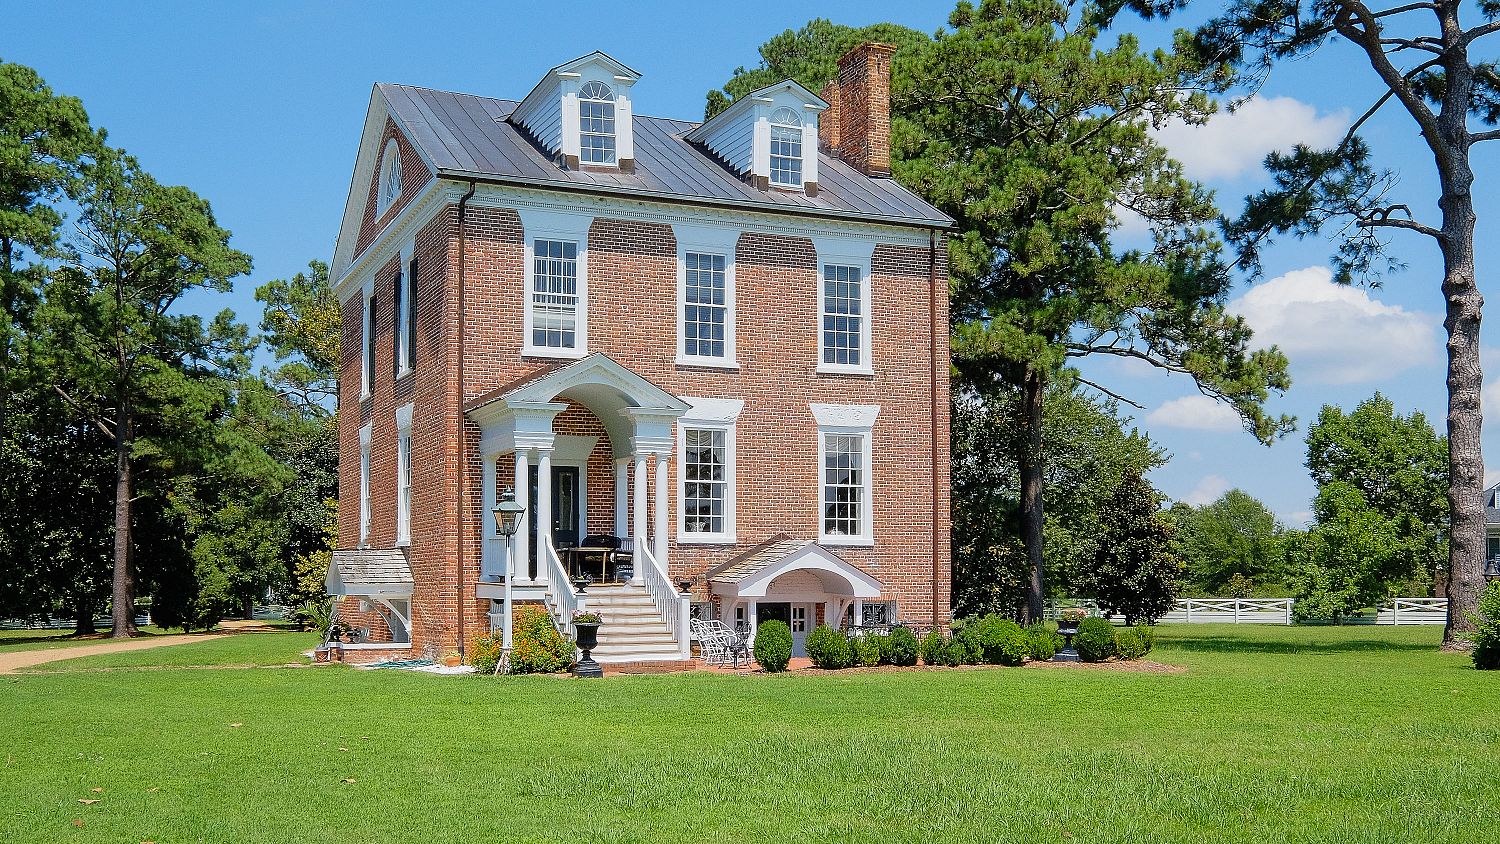 The stately Mulberry Hill manor house